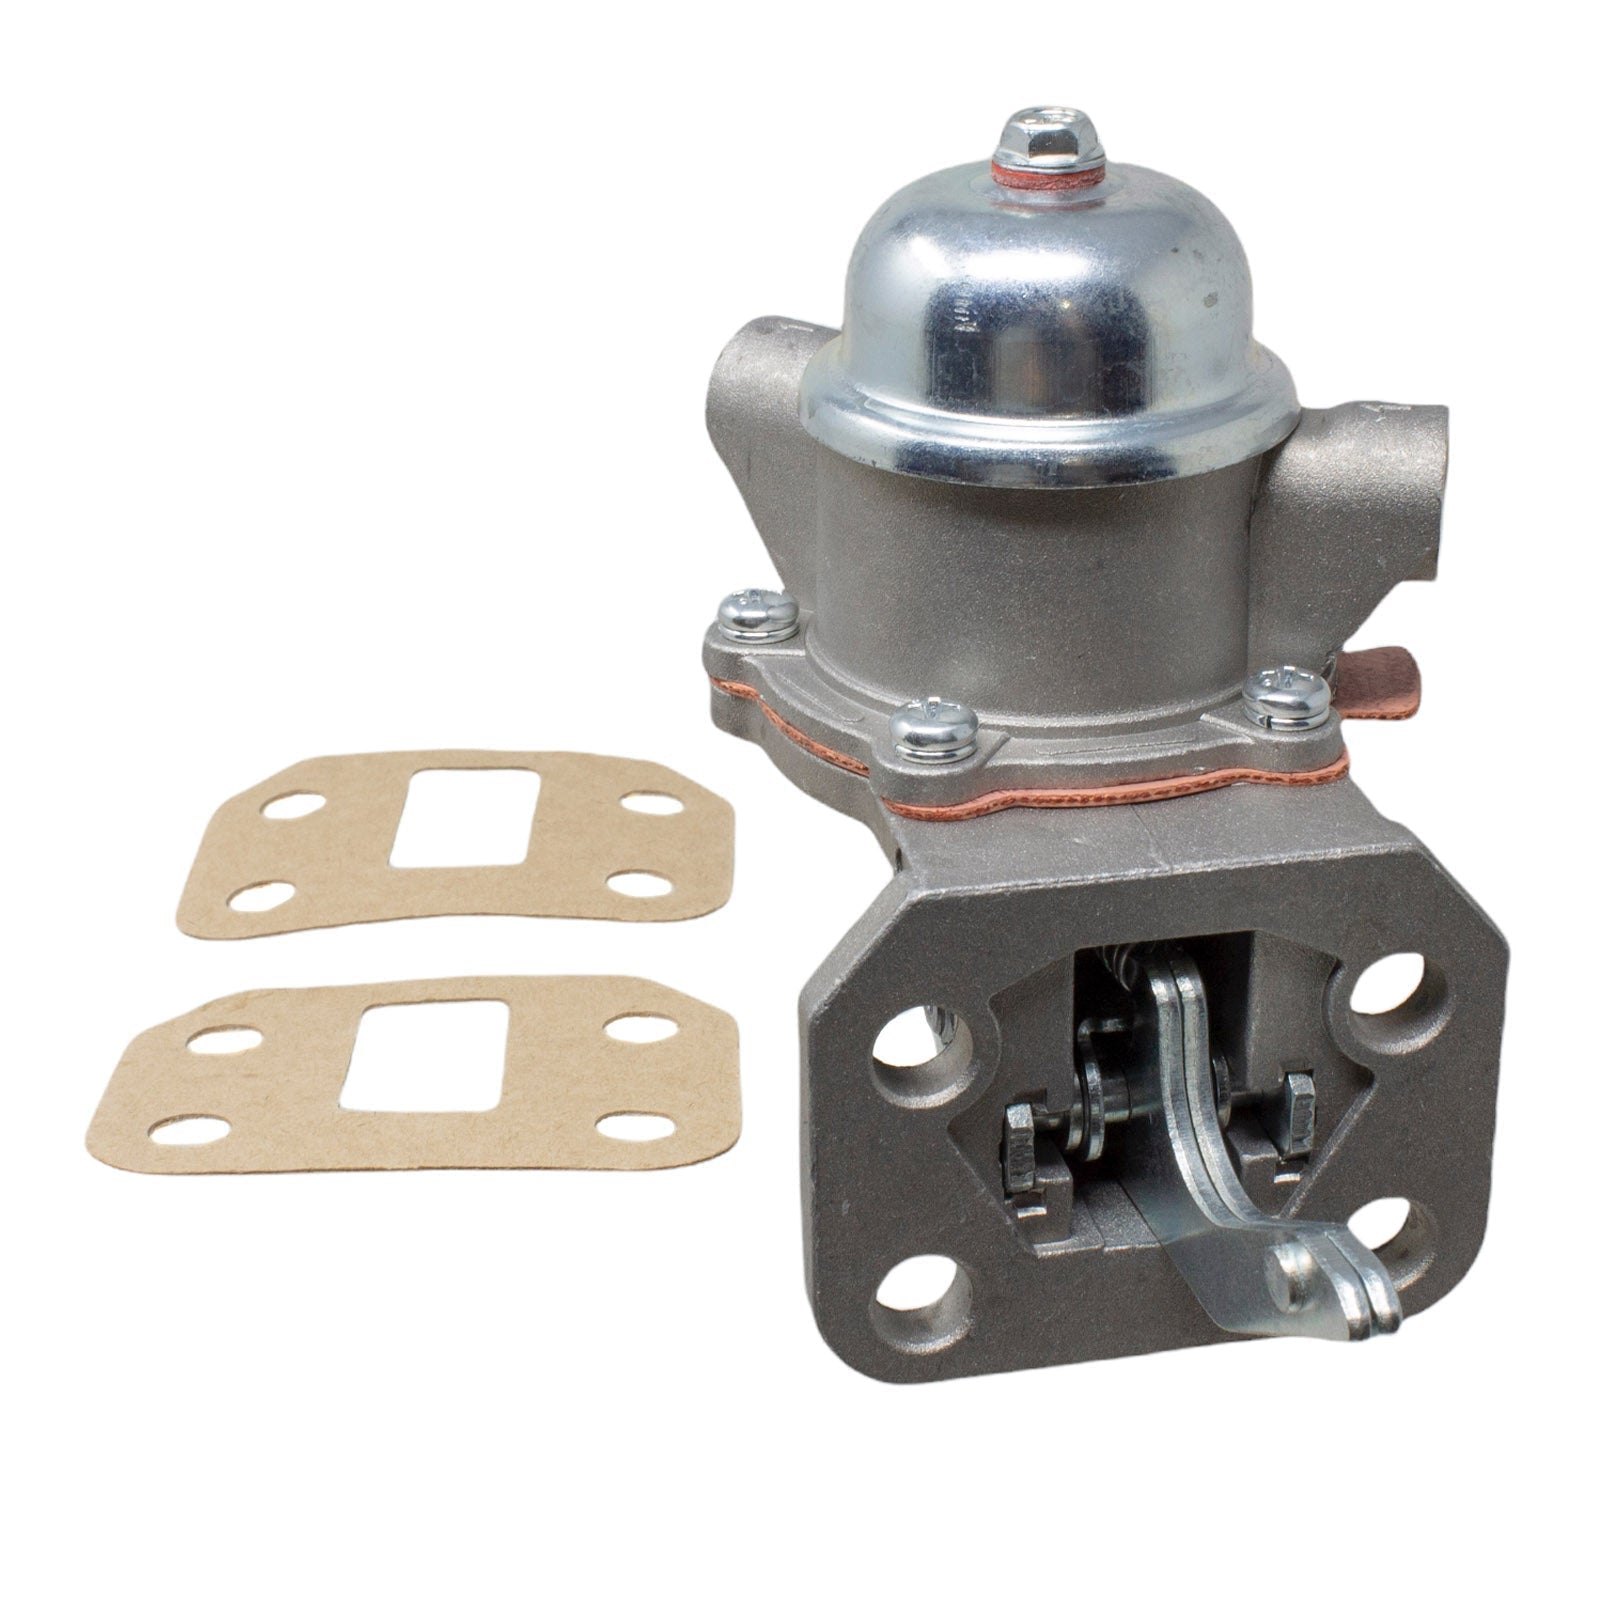 70257232, Fuel Pump For Allis Chalmers at Duraforce